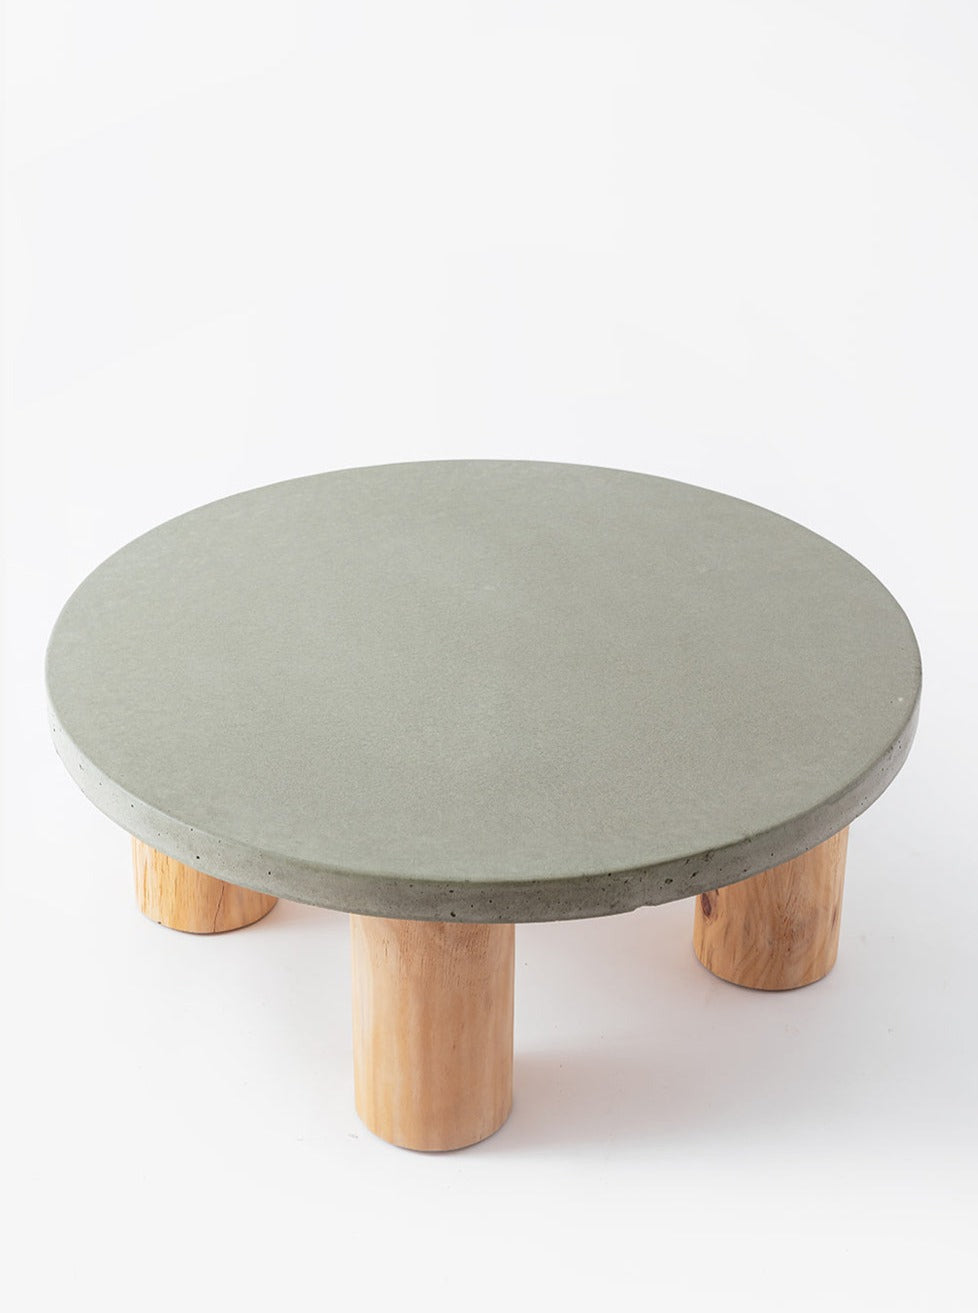 Off-Form table, Timber